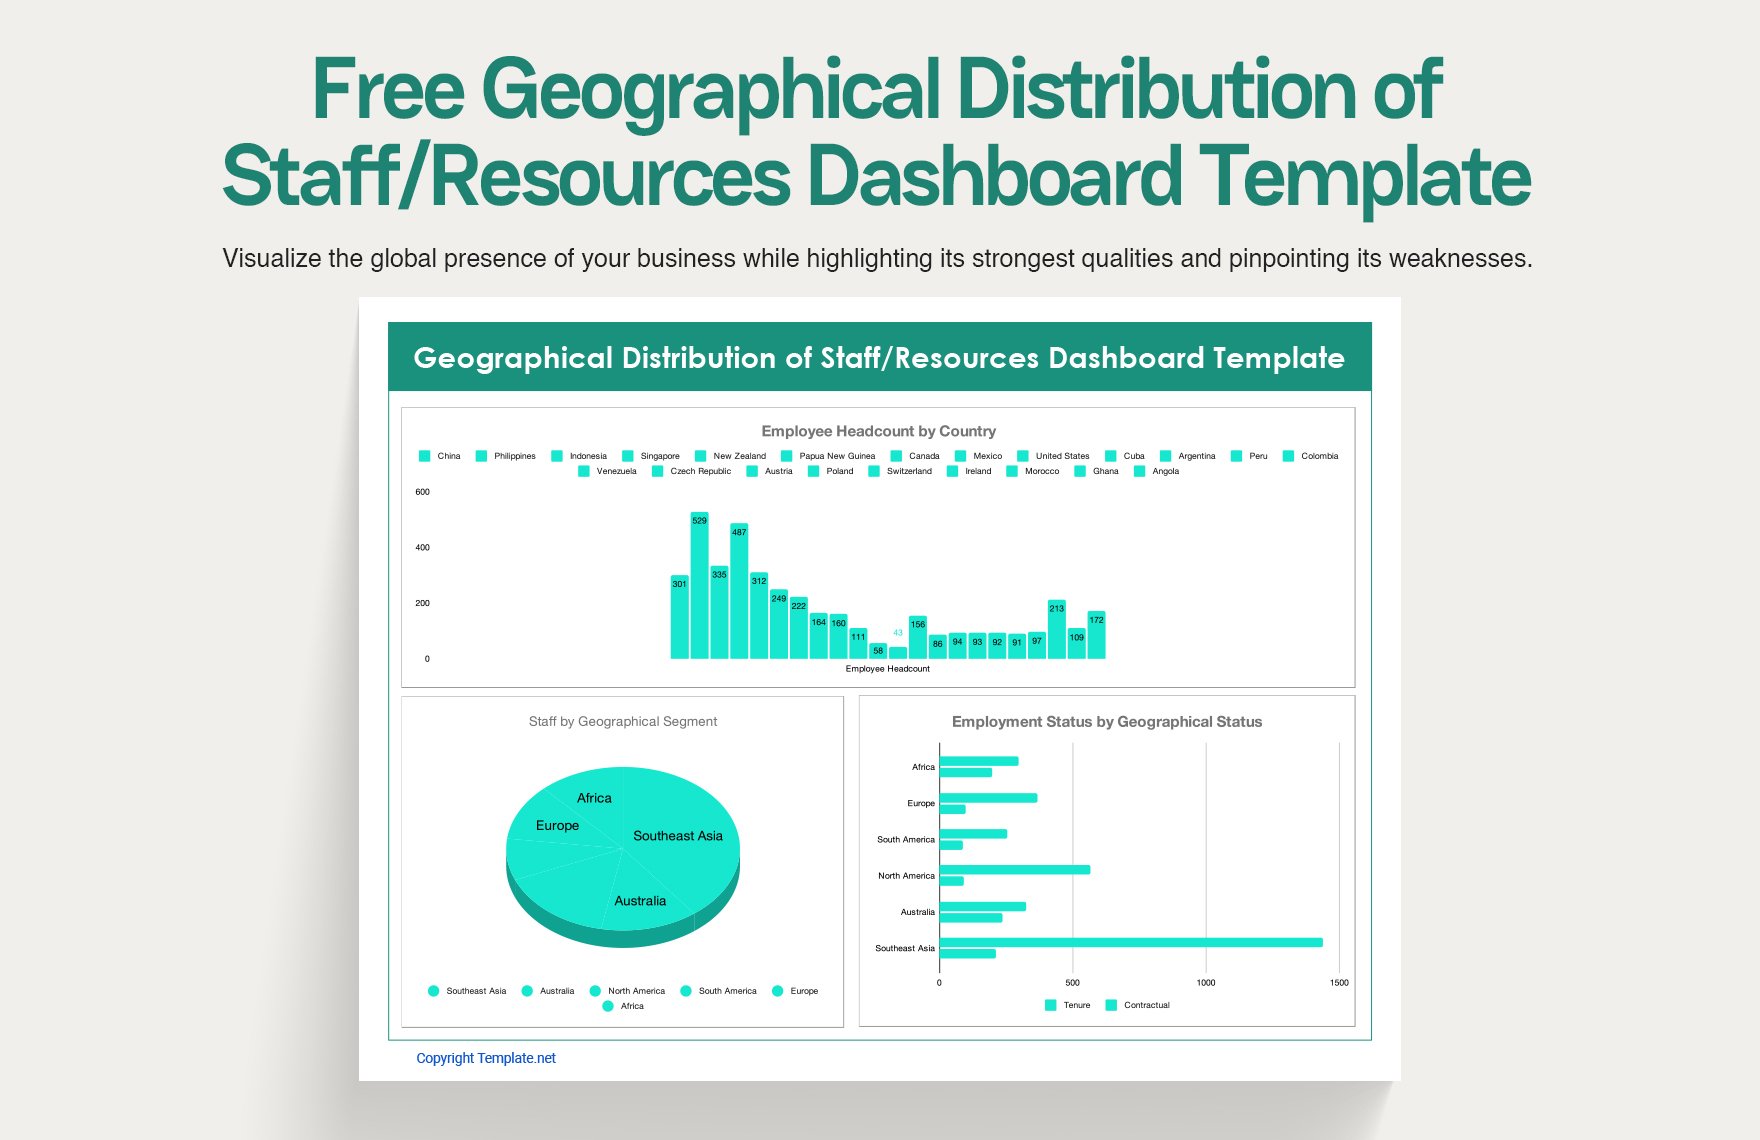 Geographical Distribution of Staff/Resources Dashboard Template